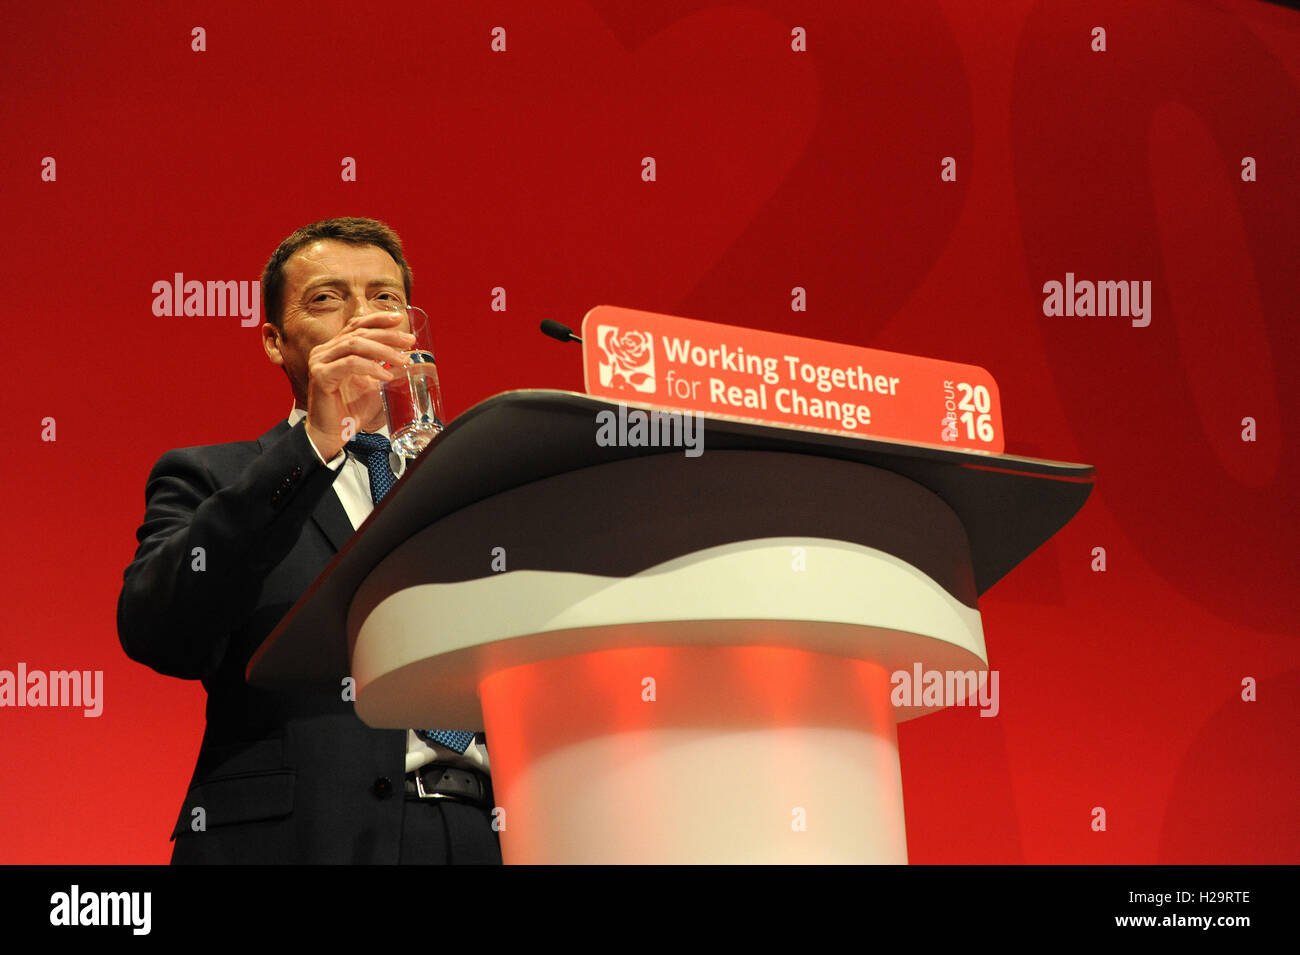 Liverpool, England. 25th September, 2016.  Ian McNicol, general secretary, delivers his report during the first day of the Labour Party annual conference at the ACC Conference Centre. On the morning of the first day of the conference there will be reports from the general secretary, the national policy forum and on digital and party organisation. This conference is following Jeremy CorbynÕs re-election as labour party leader after nine weeks of campaigning against fellow candidate, Owen Smith. This is his second leadership victory in just over twelve months and was initiated by the decision of Stock Photo